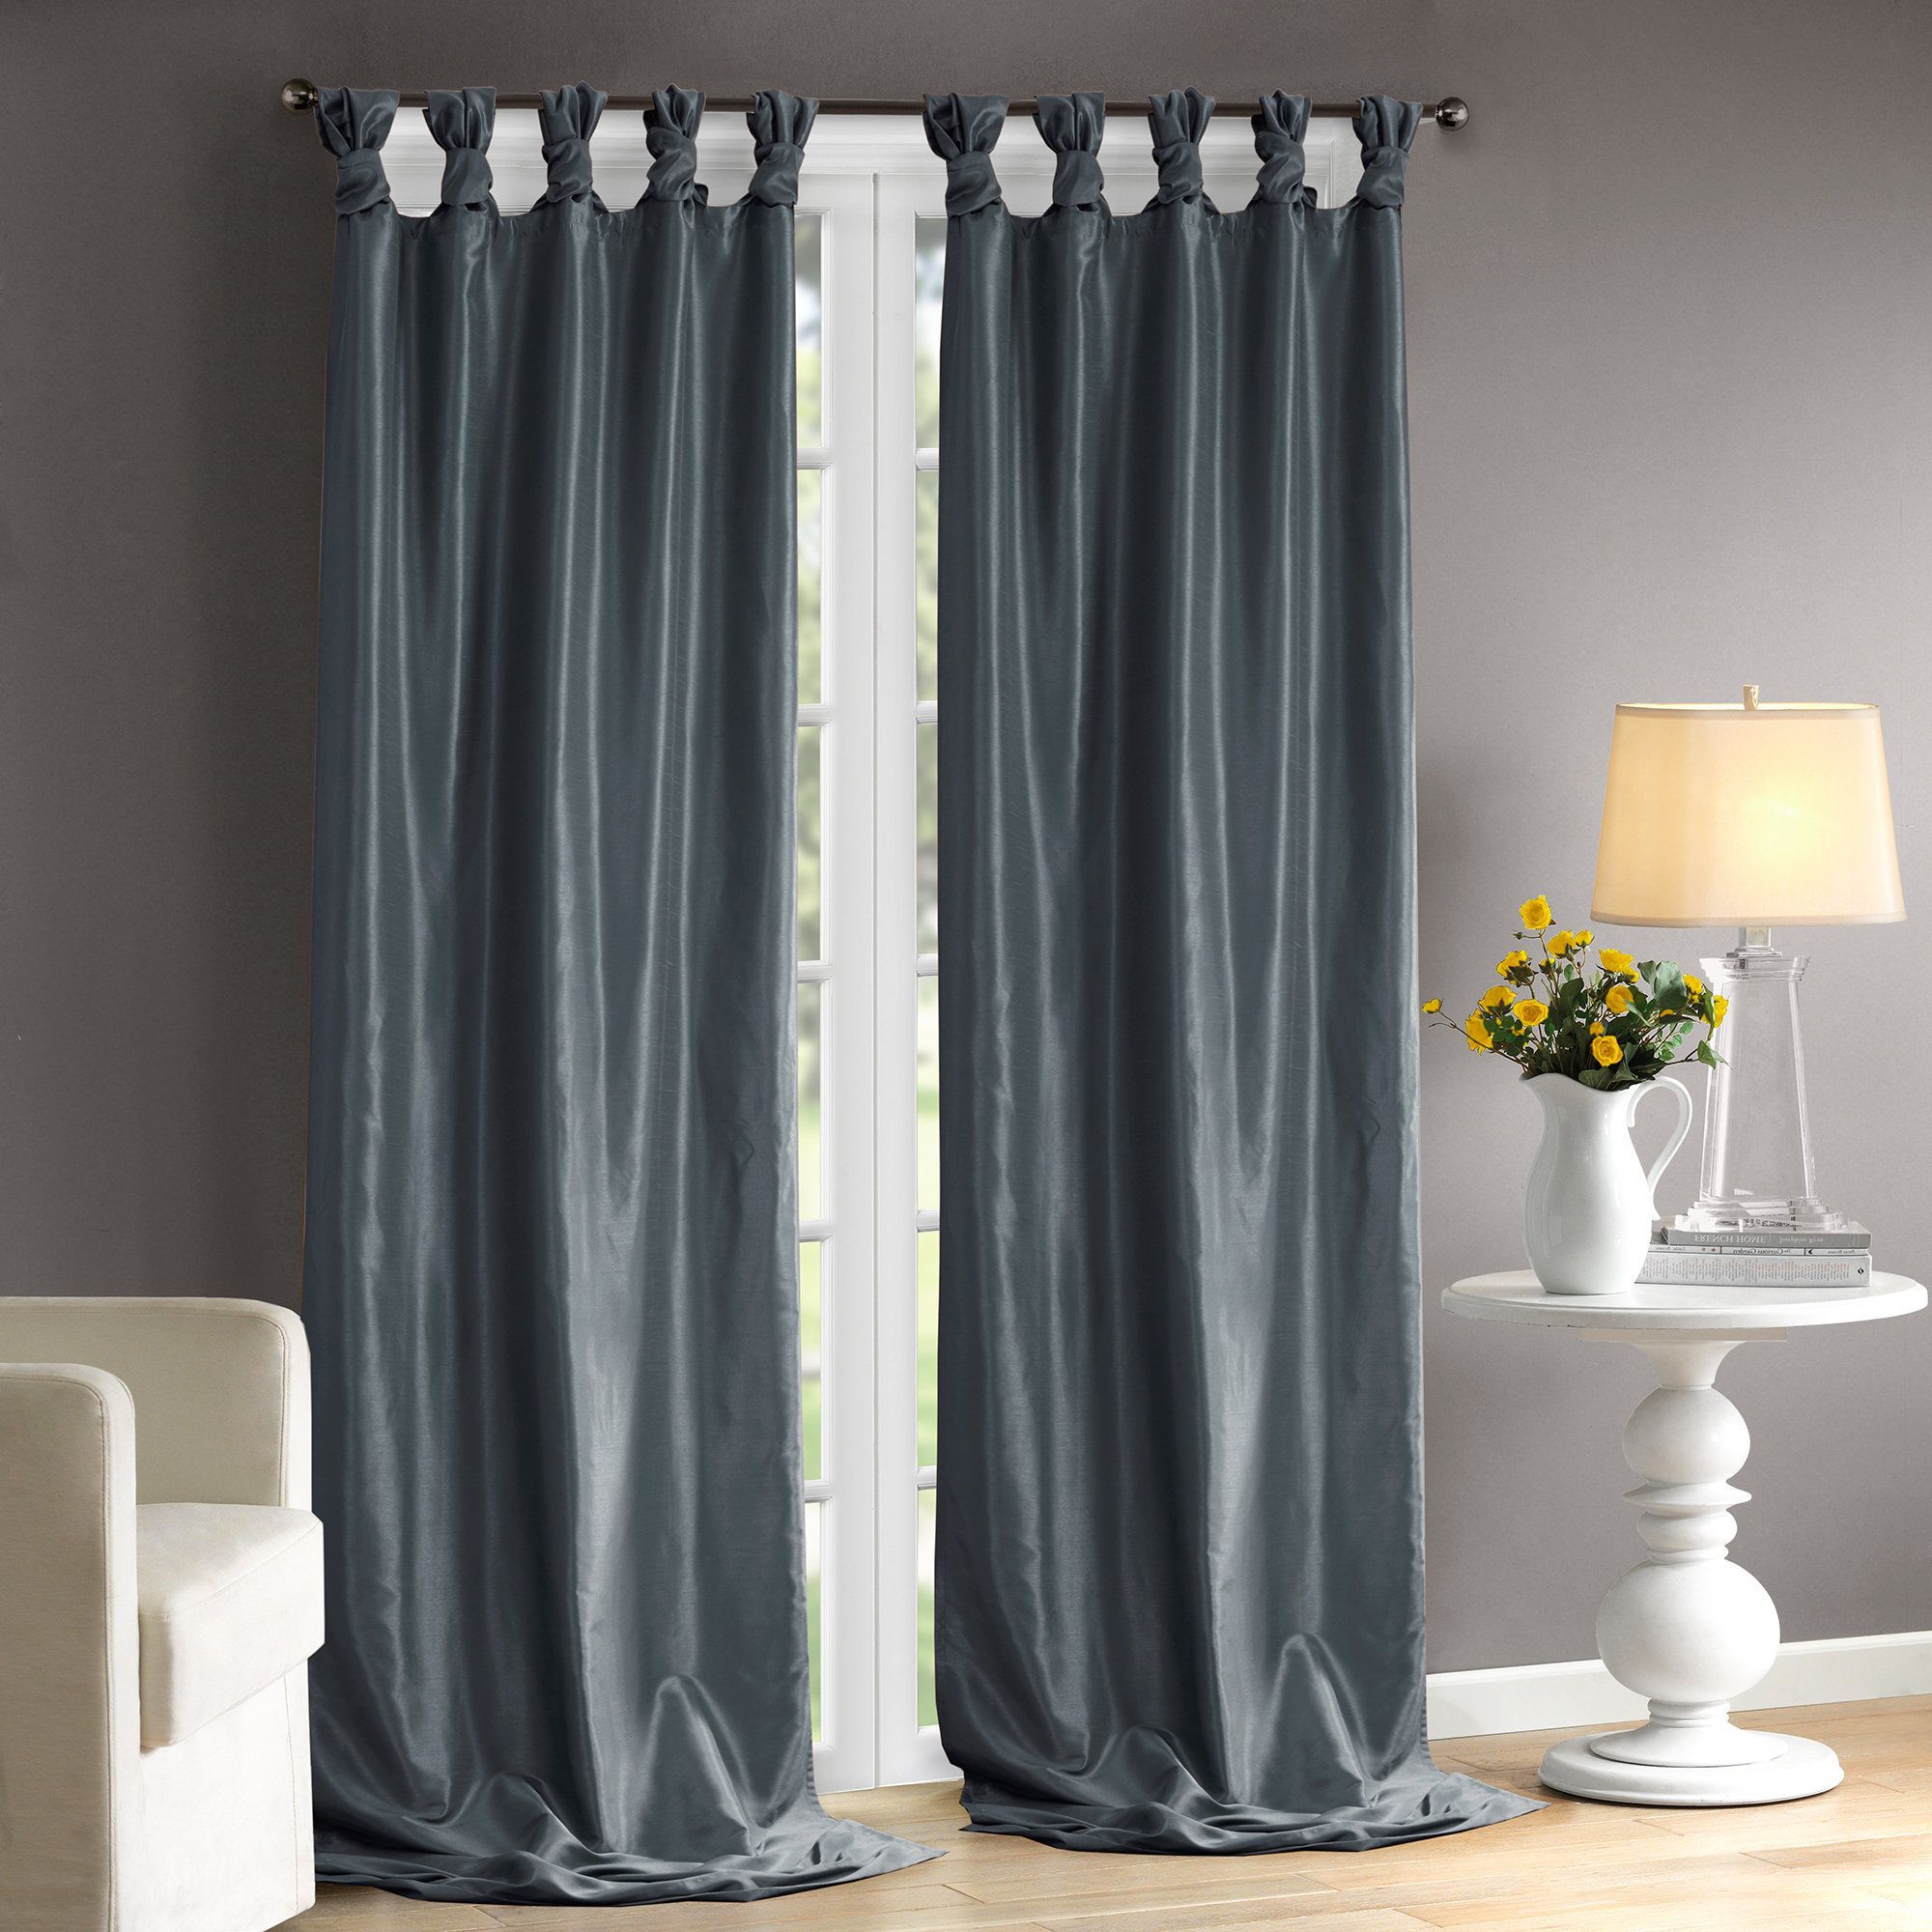 Widely Used Rivau Solid Regular Tab Top Curtain Panels (View 11 of 20)